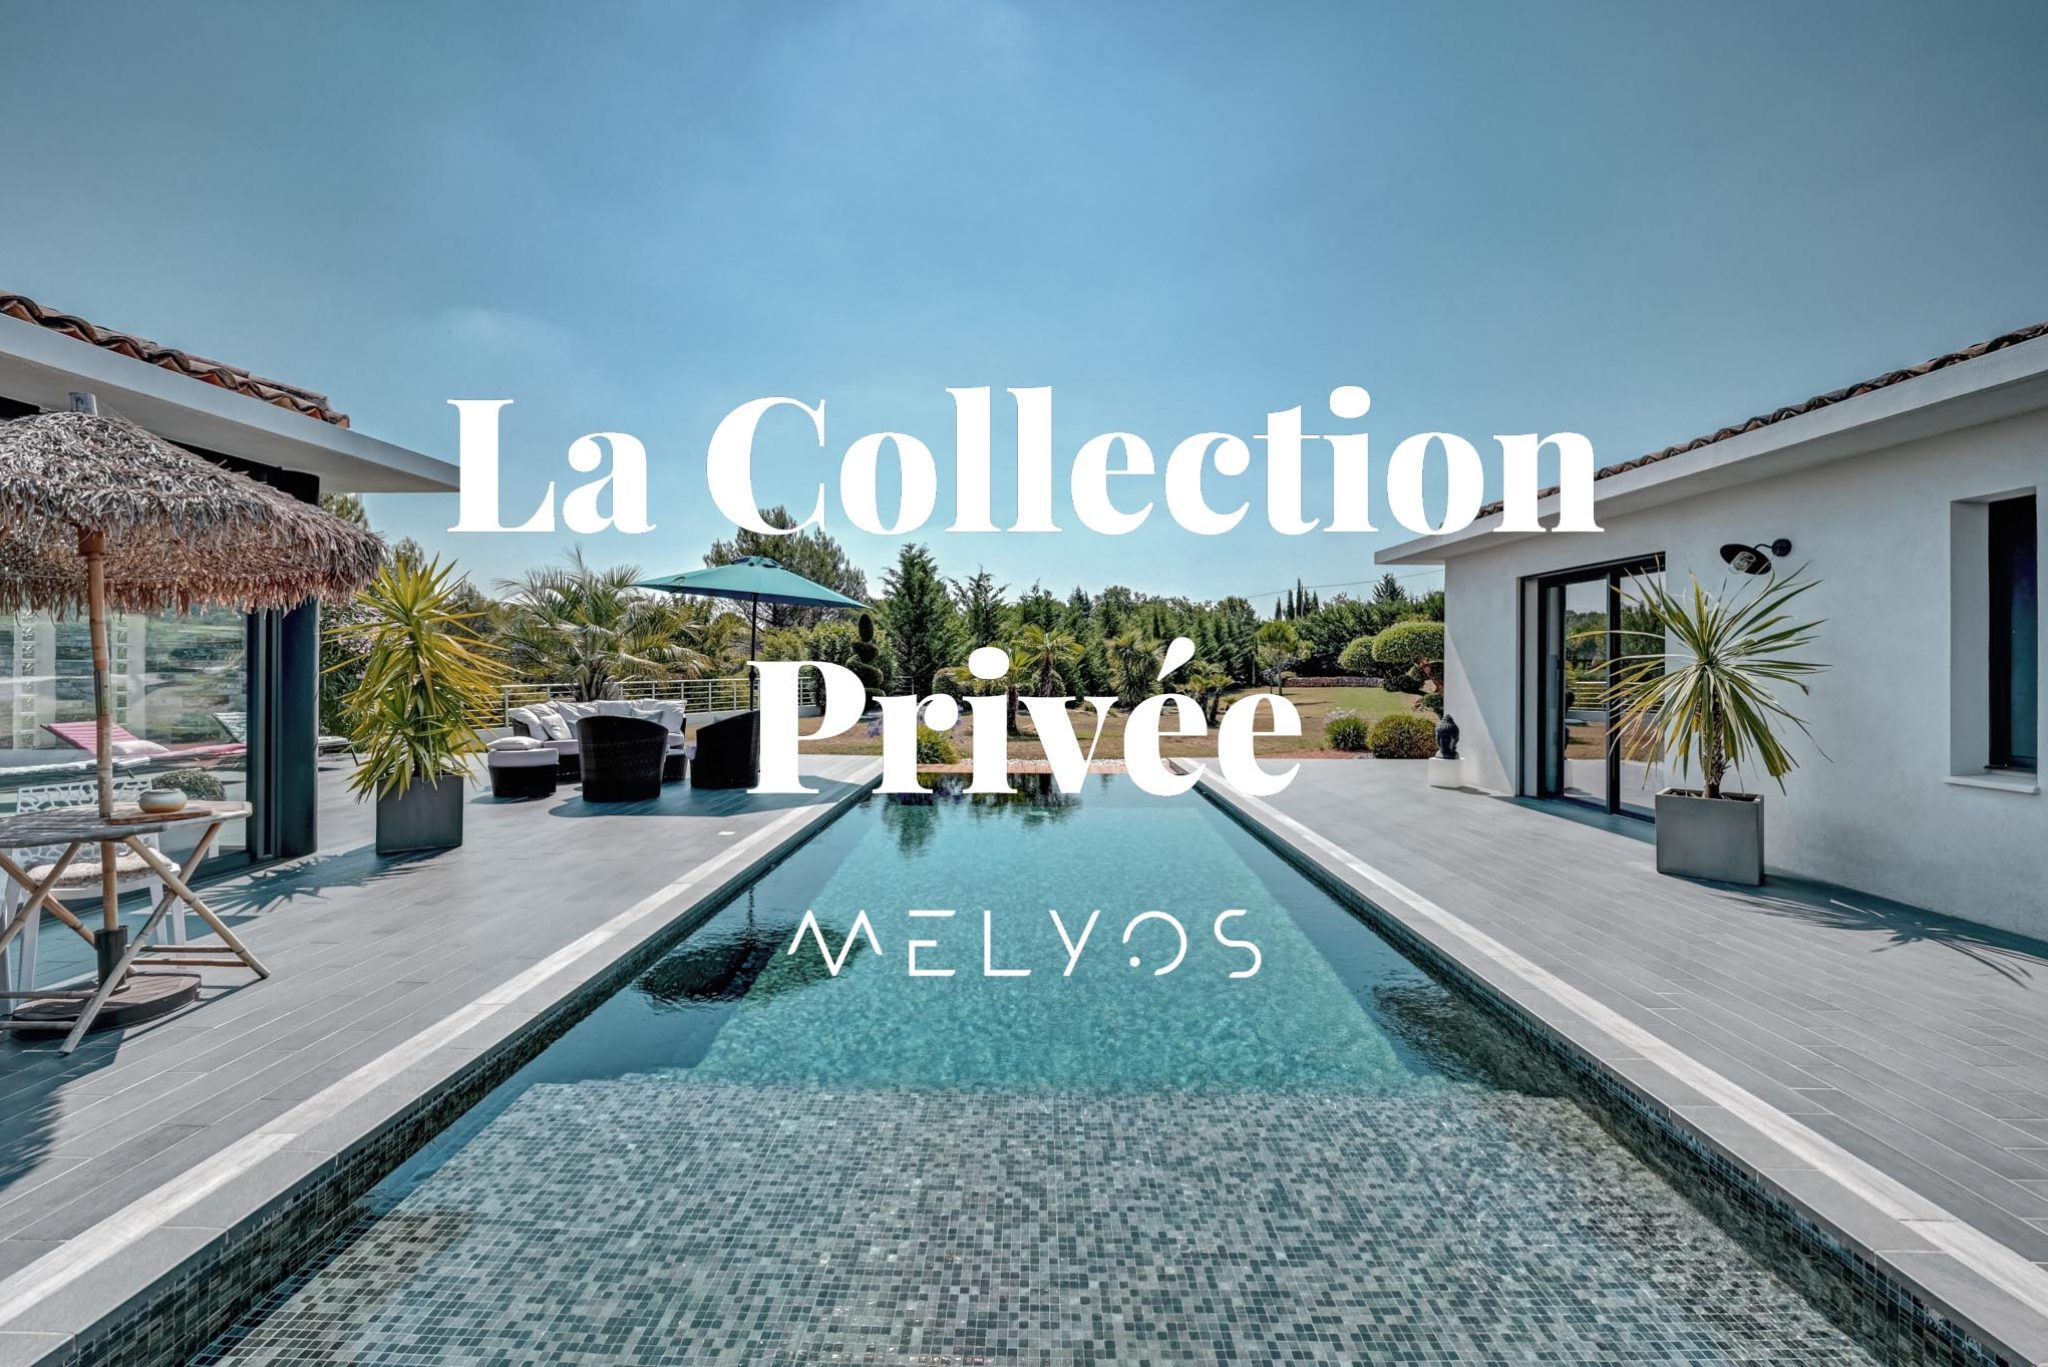 Collection Privée